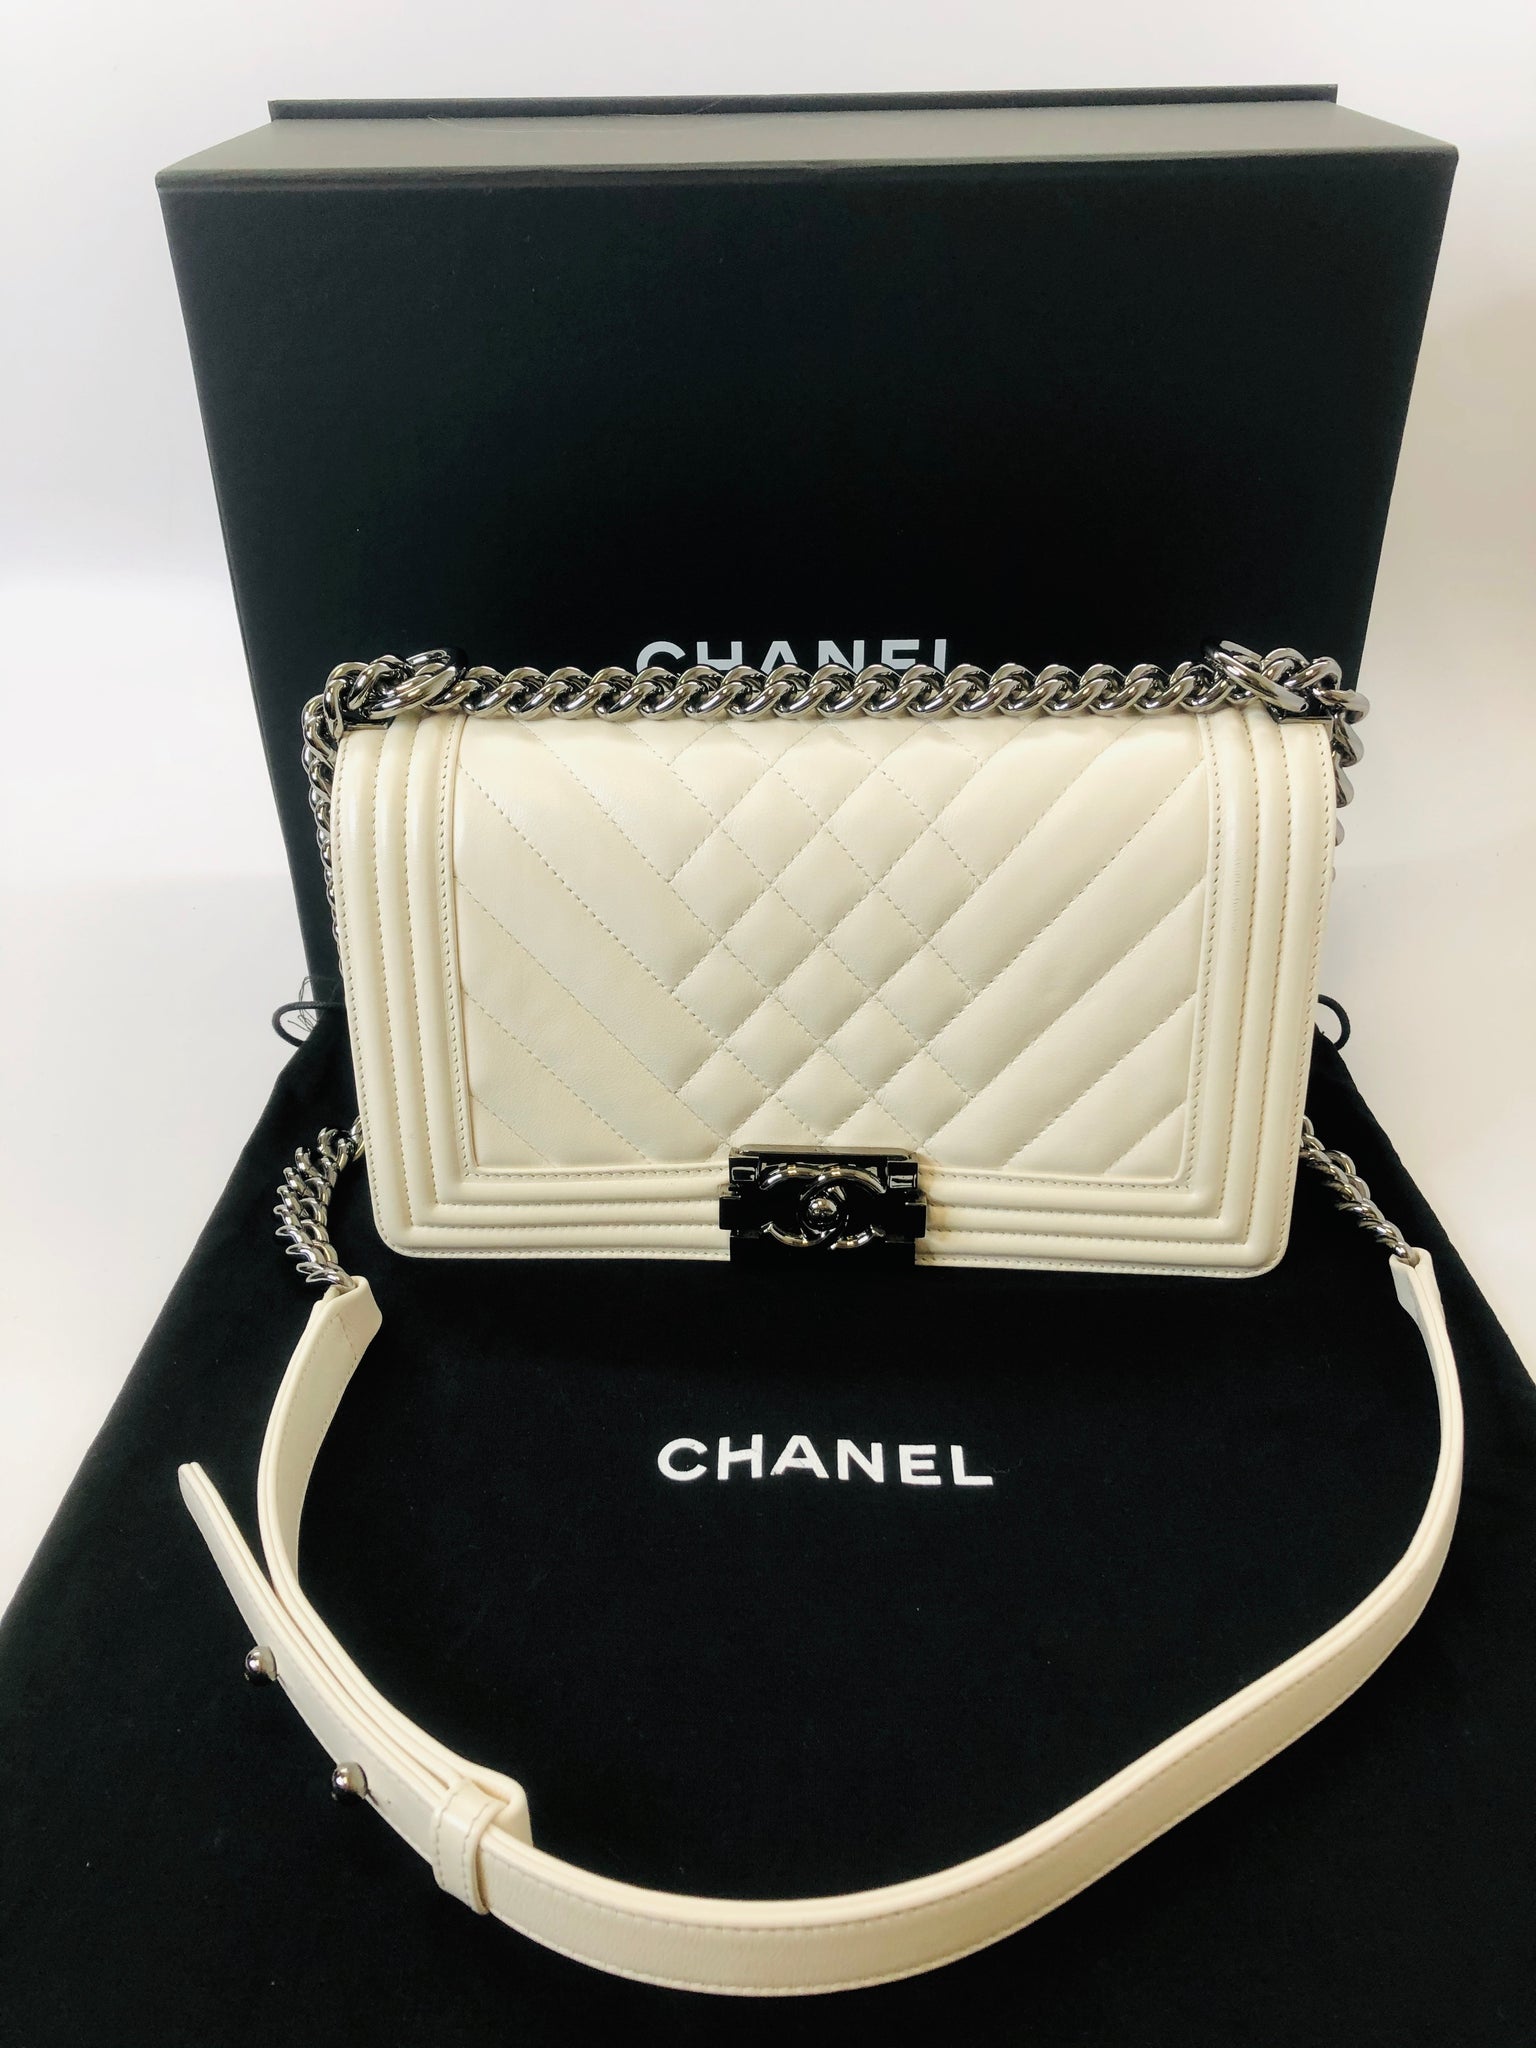 Chanel Boy medium shoulder bag in white/Pink Tweed & white patent leather,  SHW